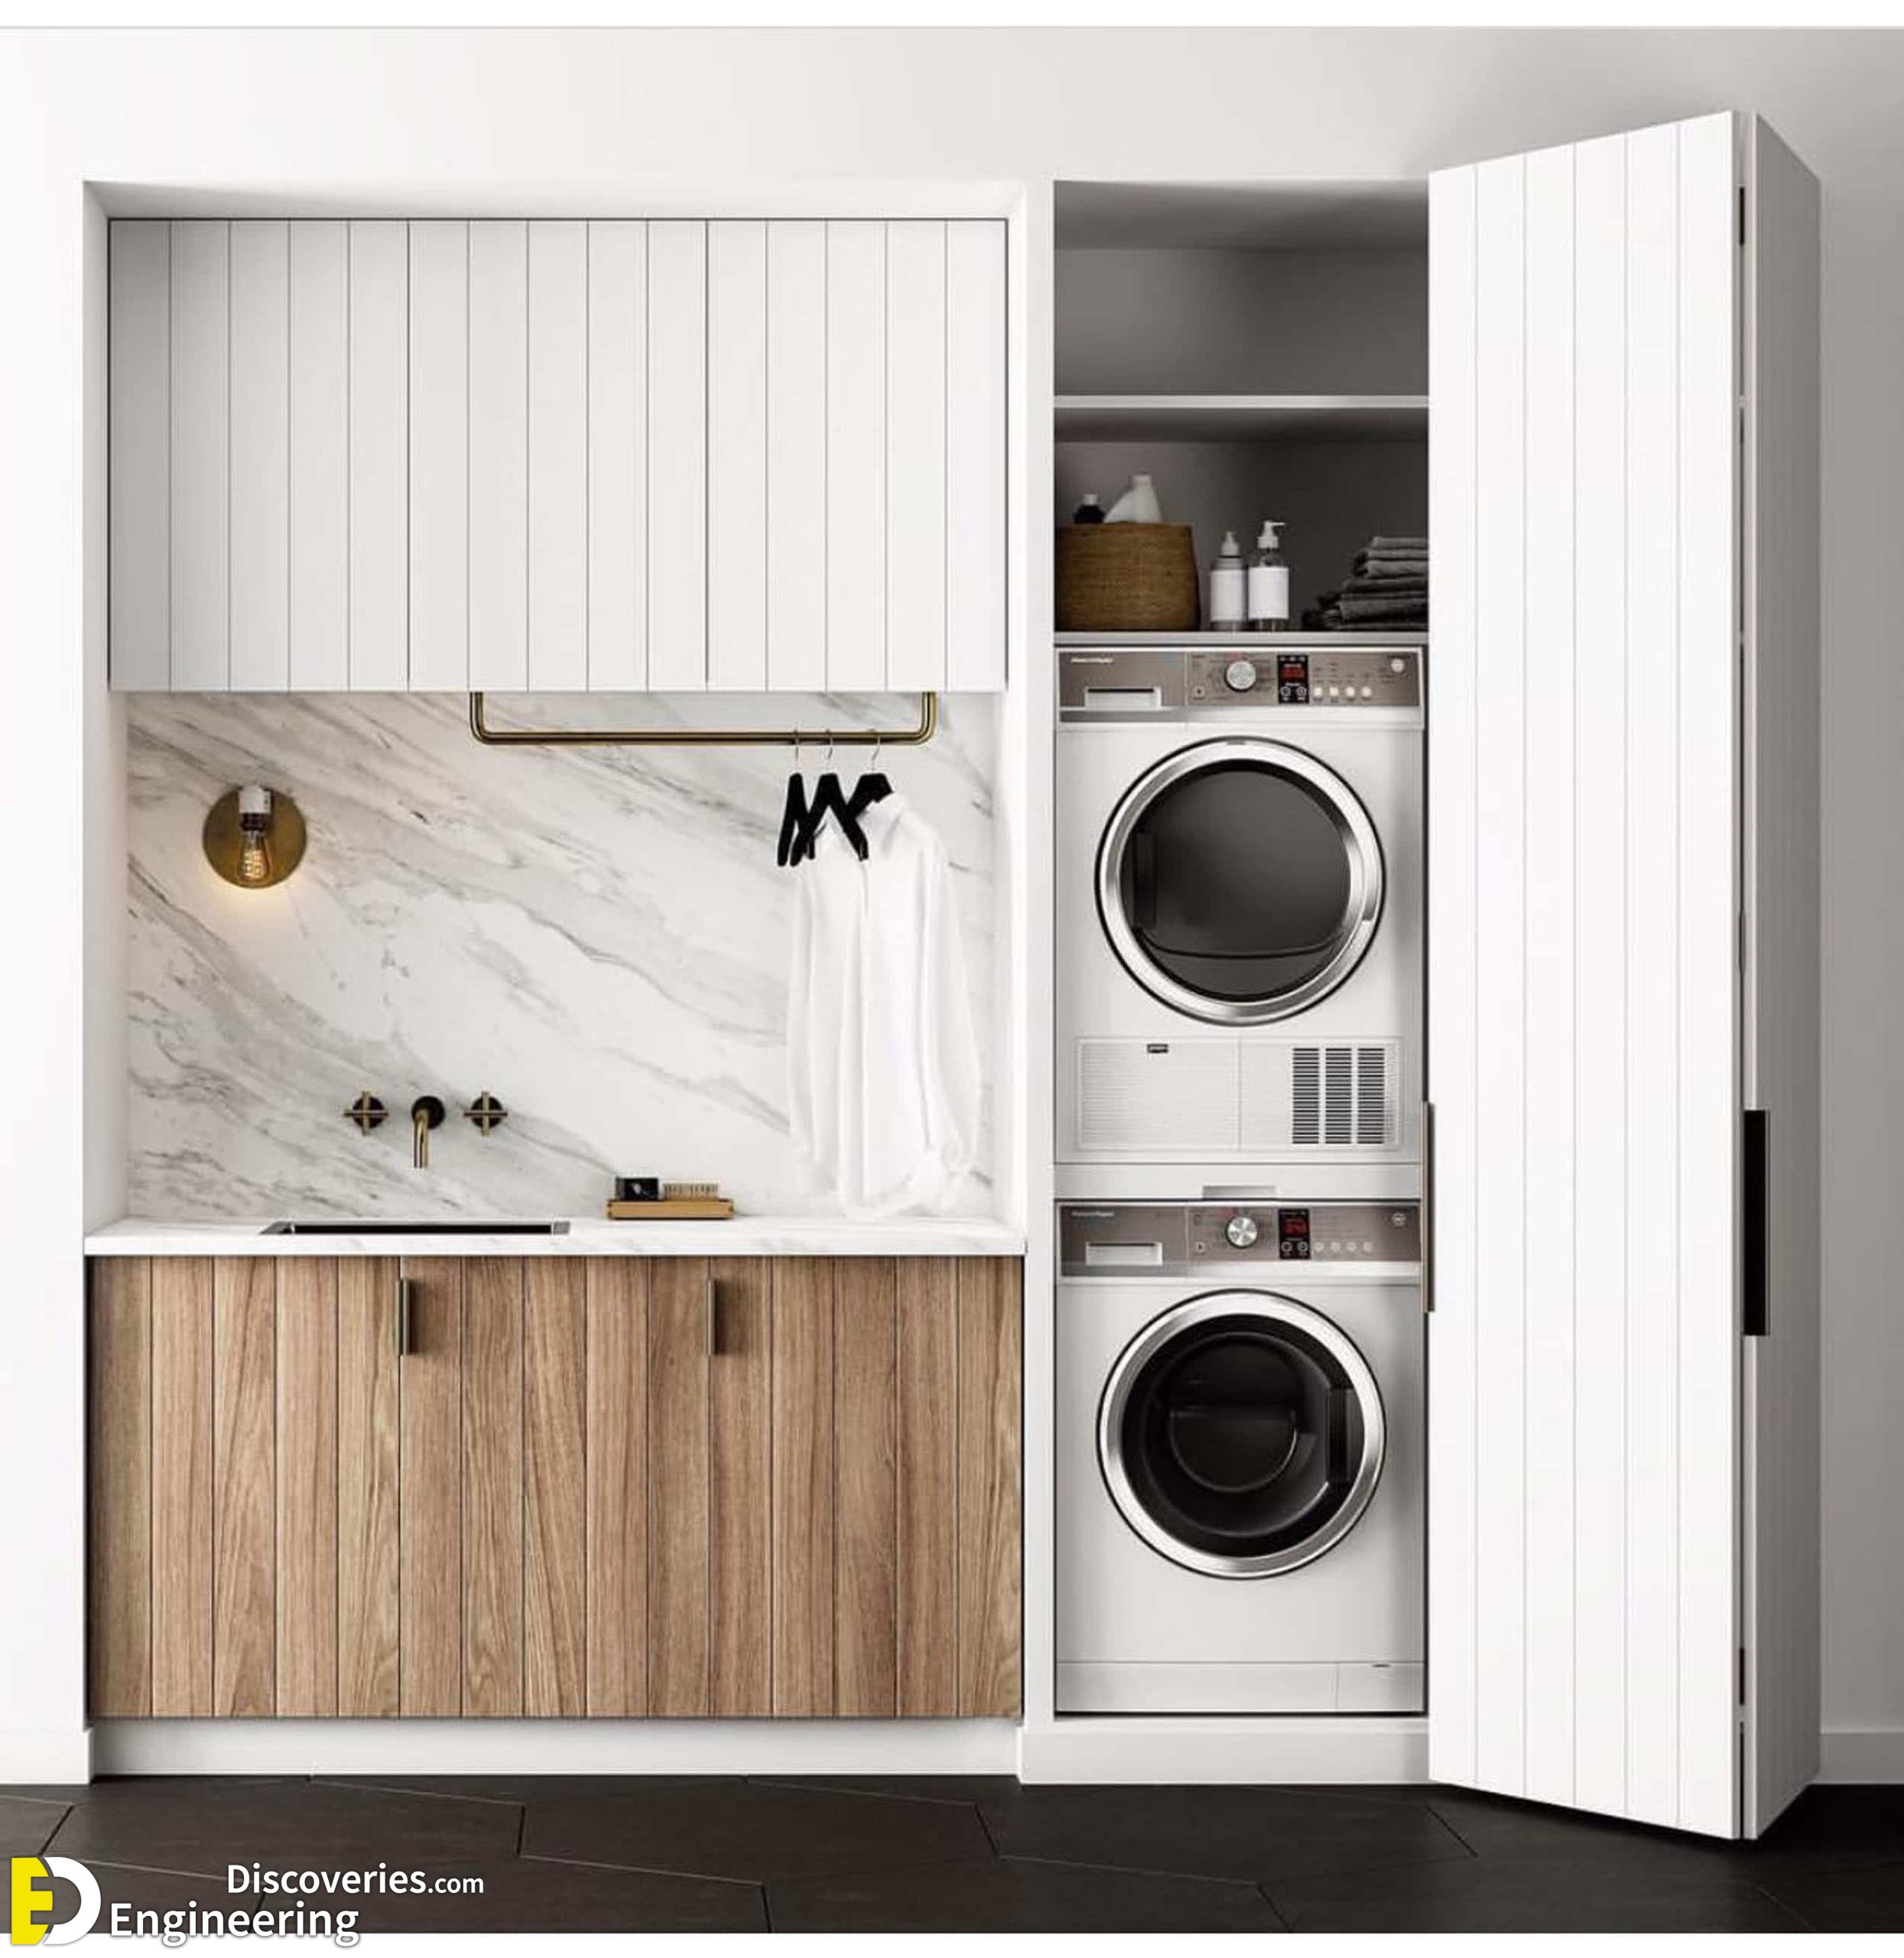 Standard Laundry Room Dimensions - Engineering Discoveries